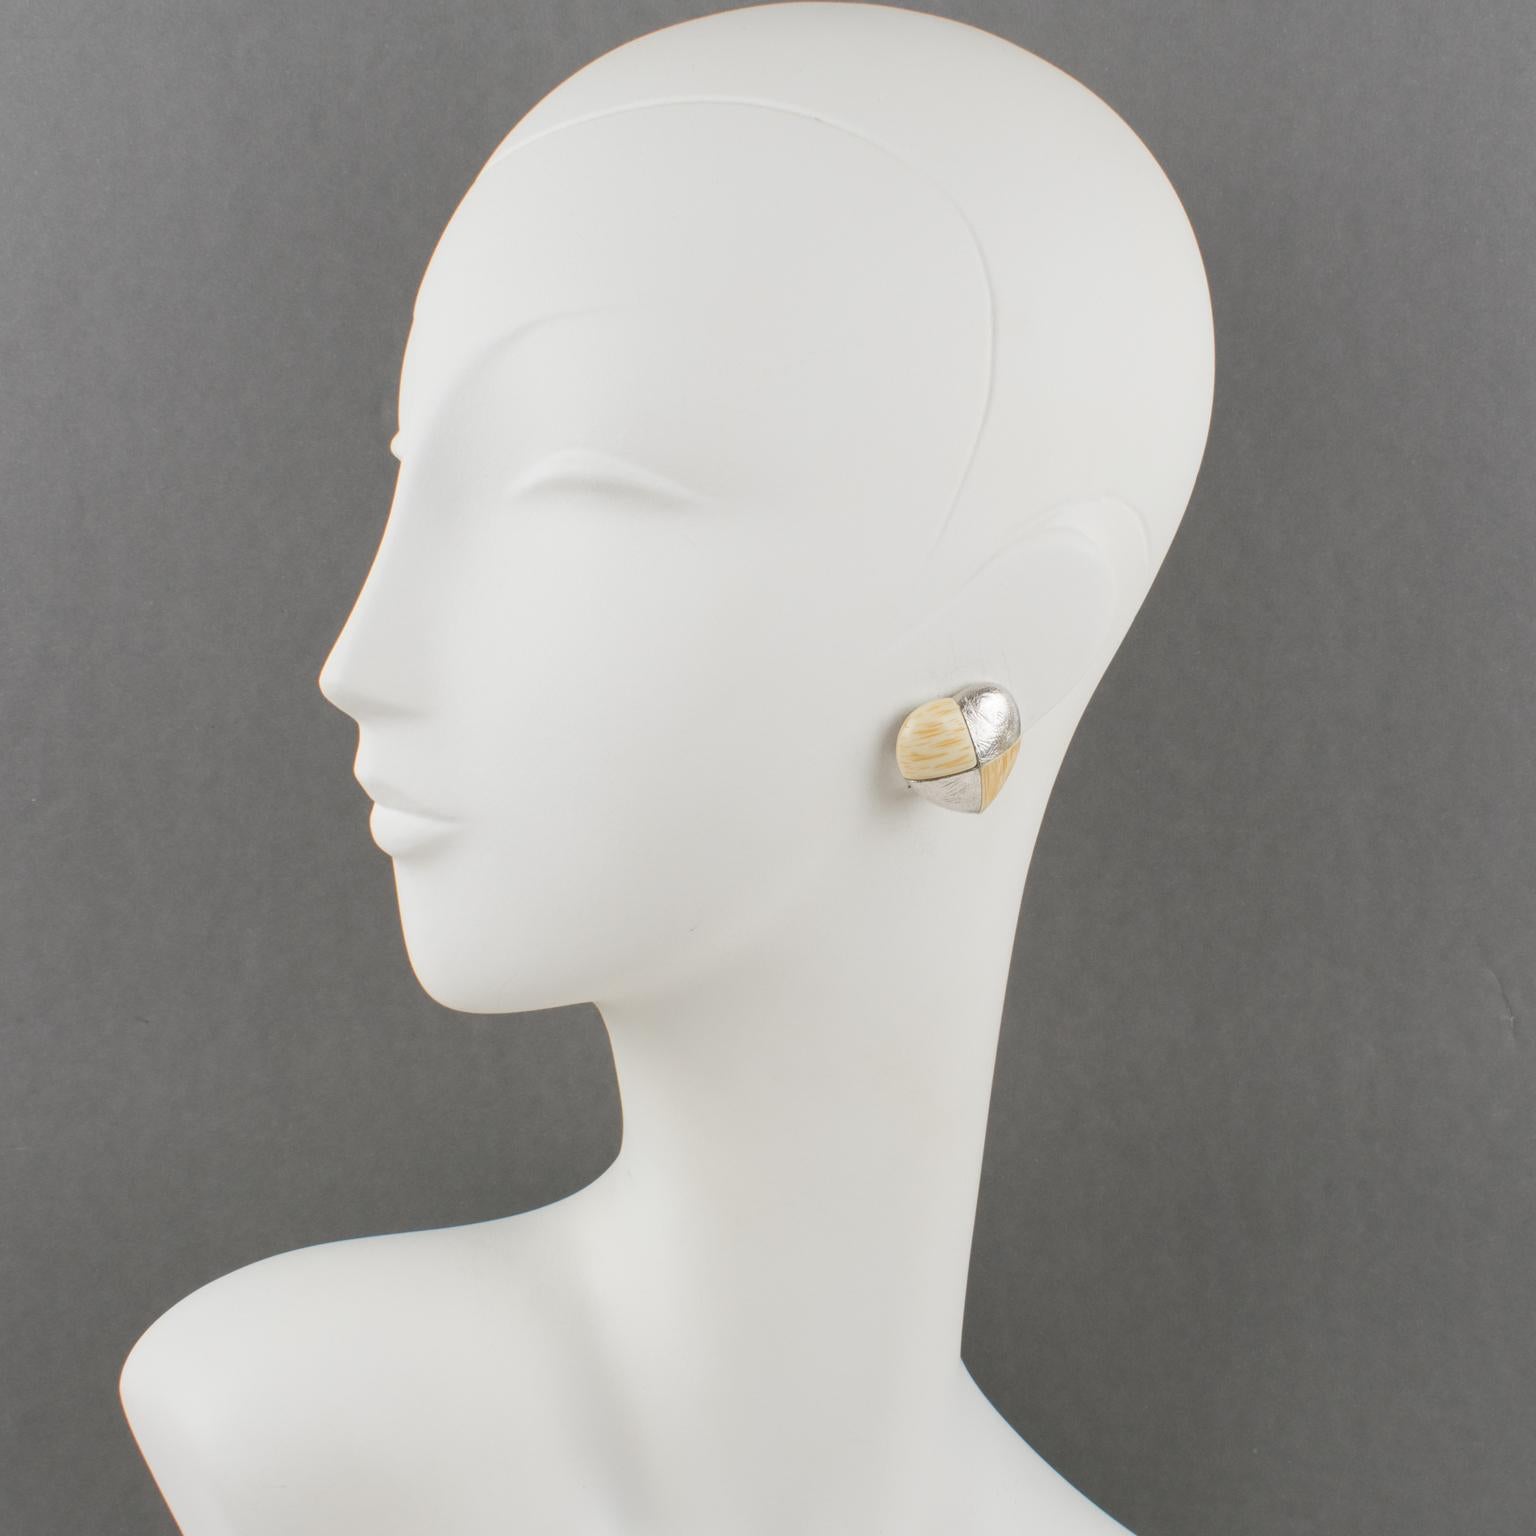 These elegant Yves Saint Laurent Paris signed clip-on earrings feature a romantic heart shape with textured silvered metal in a checkerboard pattern contrasted with off-white and beige resin elements with a textured pattern imitating bone. Each